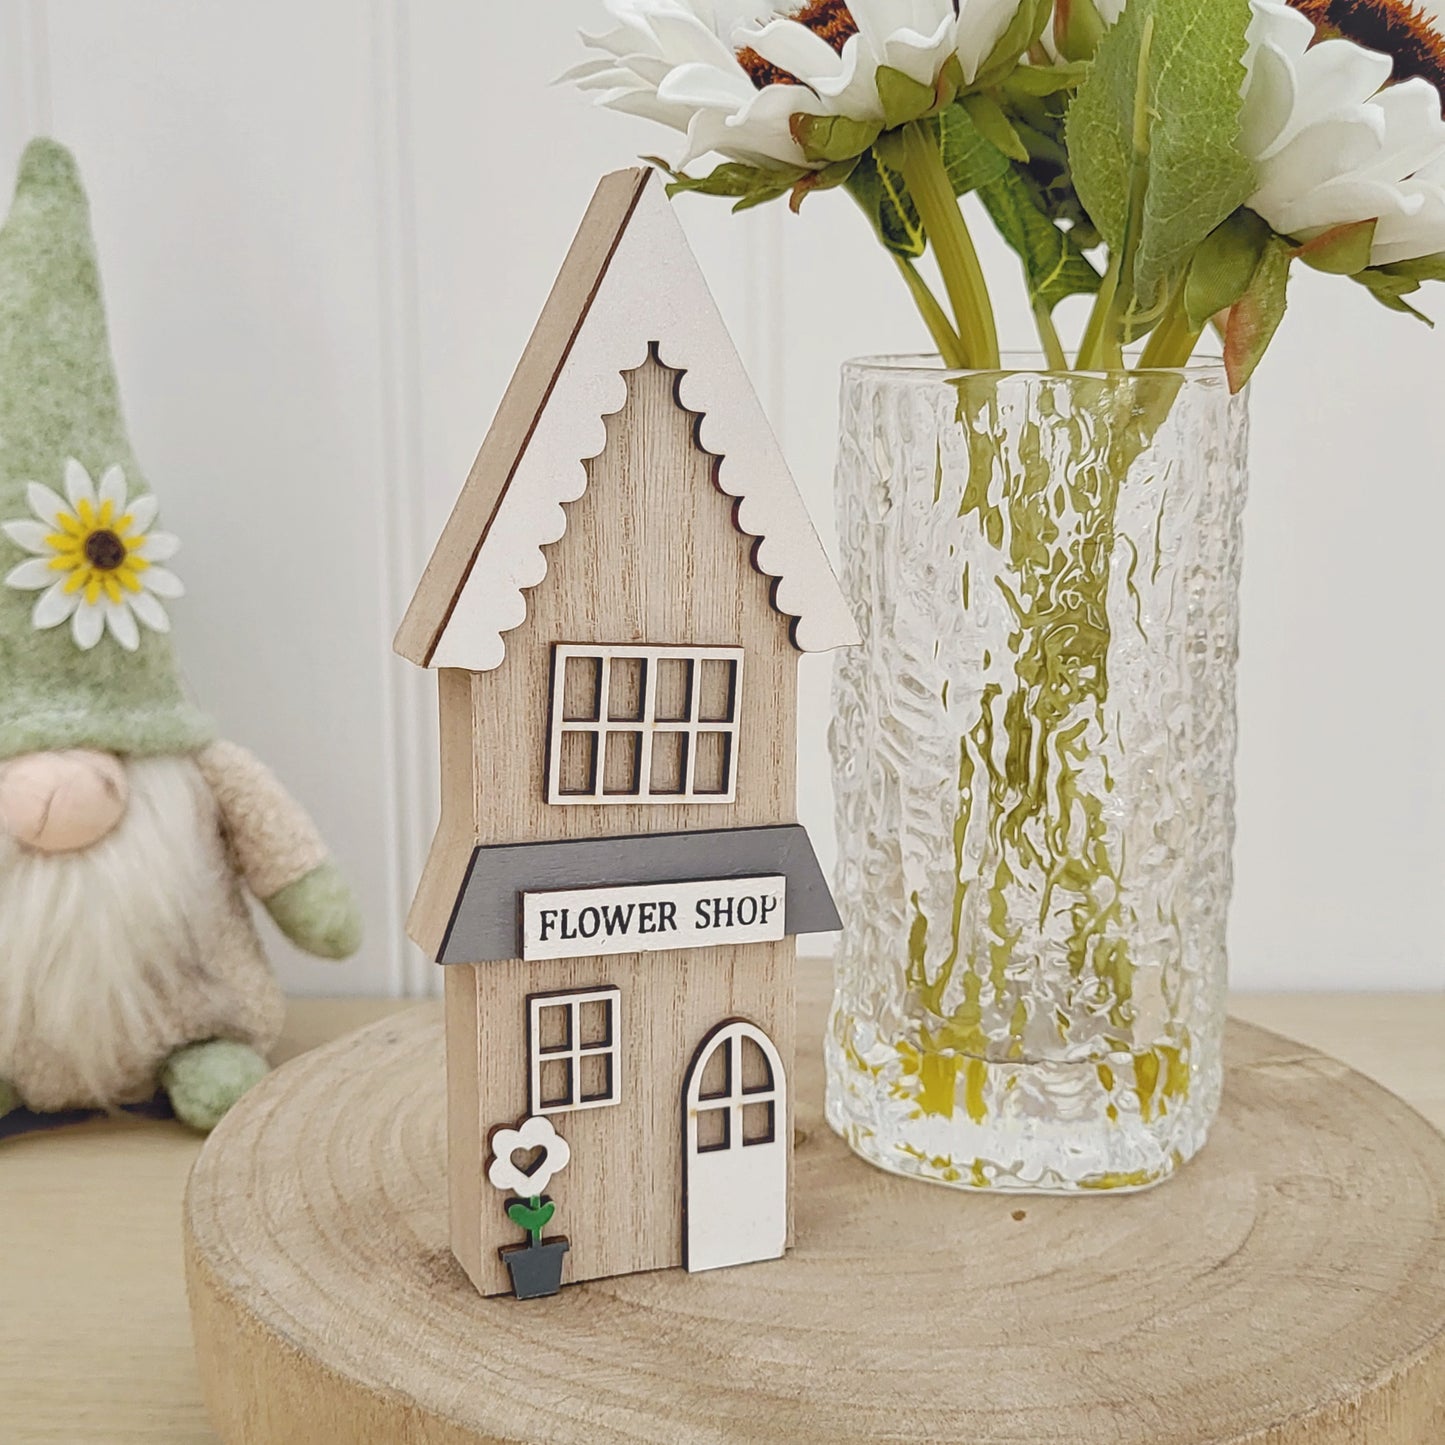 A wooden house ornament in a flower shop style displayed on a wooden board next to sunflowers in a glass vase and a sitting gonk in the background